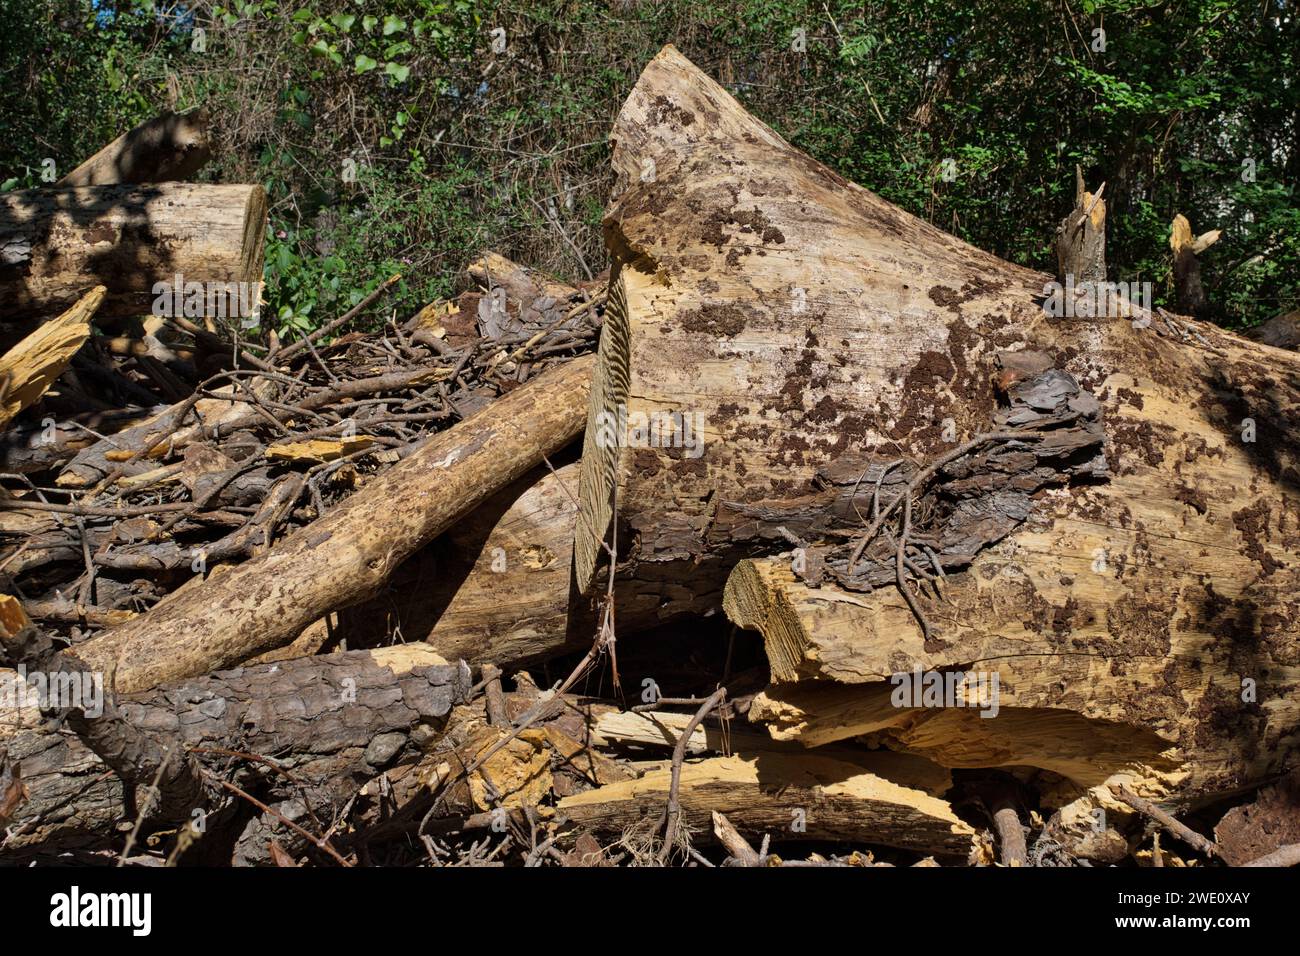 Cypress trees cut down in a forest leaving a large pile of debris. Logging industry and tree removal conceptual image. Stock Photo